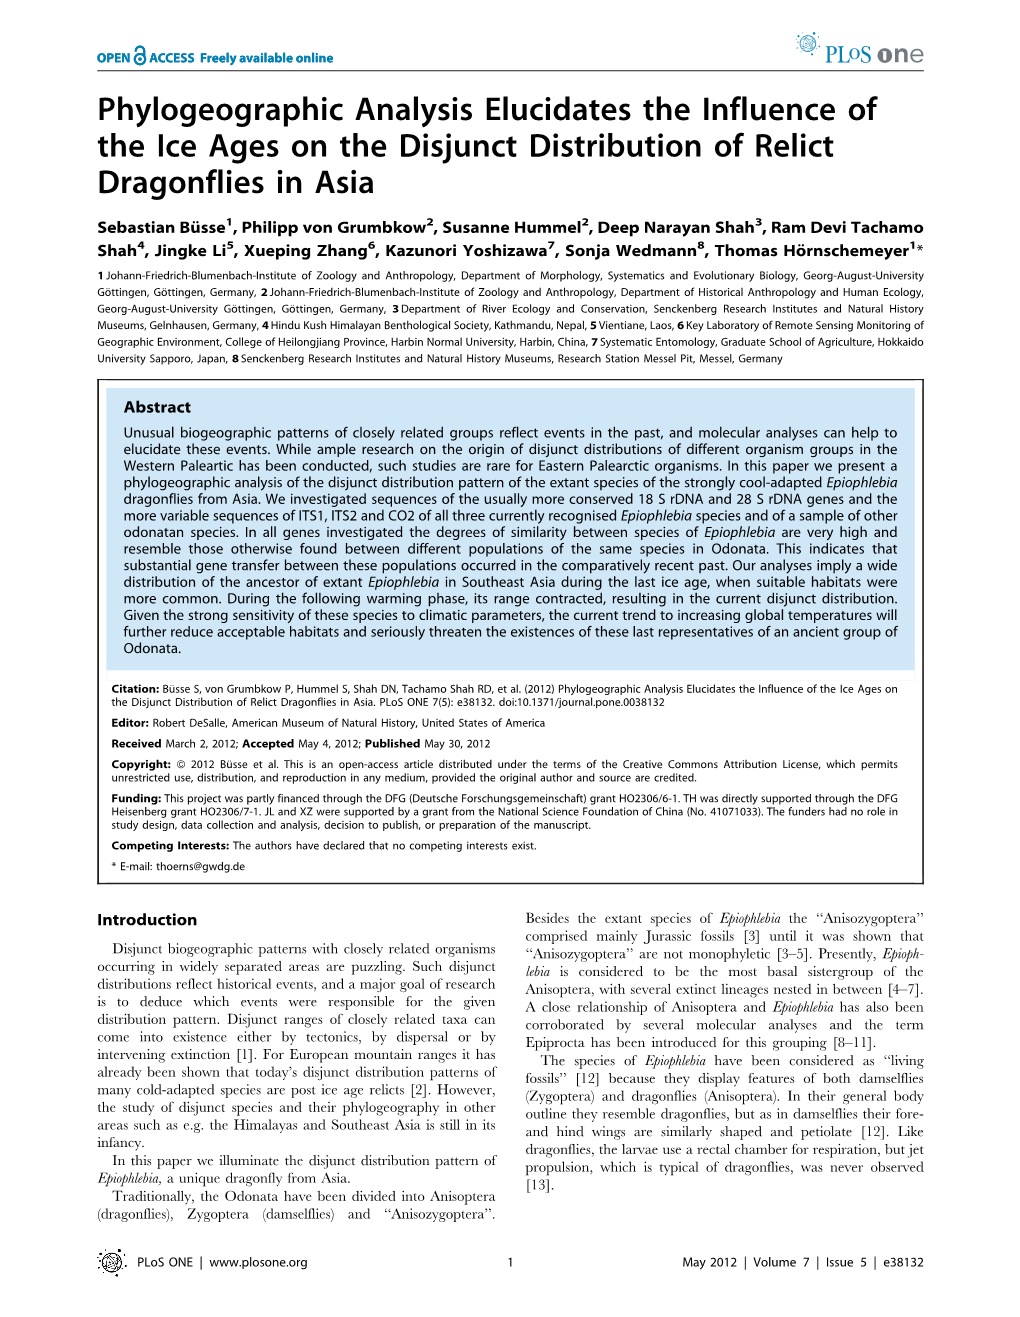 Phylogeographic Analysis Elucidates the Influence of the Ice Ages on the Disjunct Distribution of Relict Dragonflies in Asia